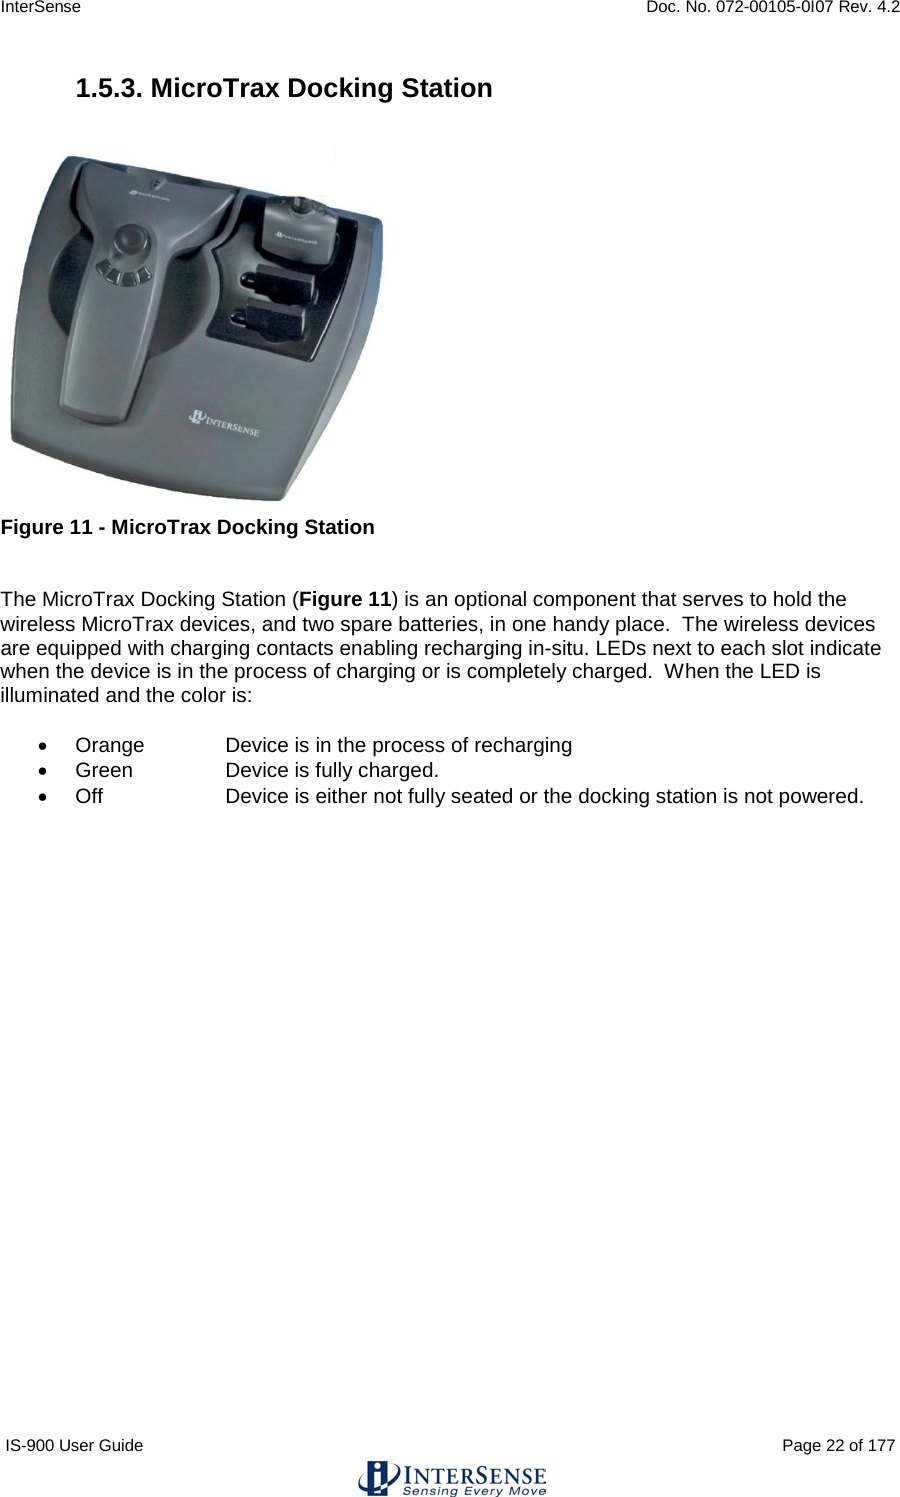 InterSense    Doc. No. 072-00105-0I07 Rev. 4.2 IS-900 User Guide                                                                                                                                          Page 22 of 177  1.5.3. MicroTrax Docking Station   Figure 11 - MicroTrax Docking Station   The MicroTrax Docking Station (Figure 11) is an optional component that serves to hold the wireless MicroTrax devices, and two spare batteries, in one handy place.  The wireless devices are equipped with charging contacts enabling recharging in-situ. LEDs next to each slot indicate when the device is in the process of charging or is completely charged.  When the LED is illuminated and the color is:  • Orange   Device is in the process of recharging • Green    Device is fully charged. • Off    Device is either not fully seated or the docking station is not powered.    